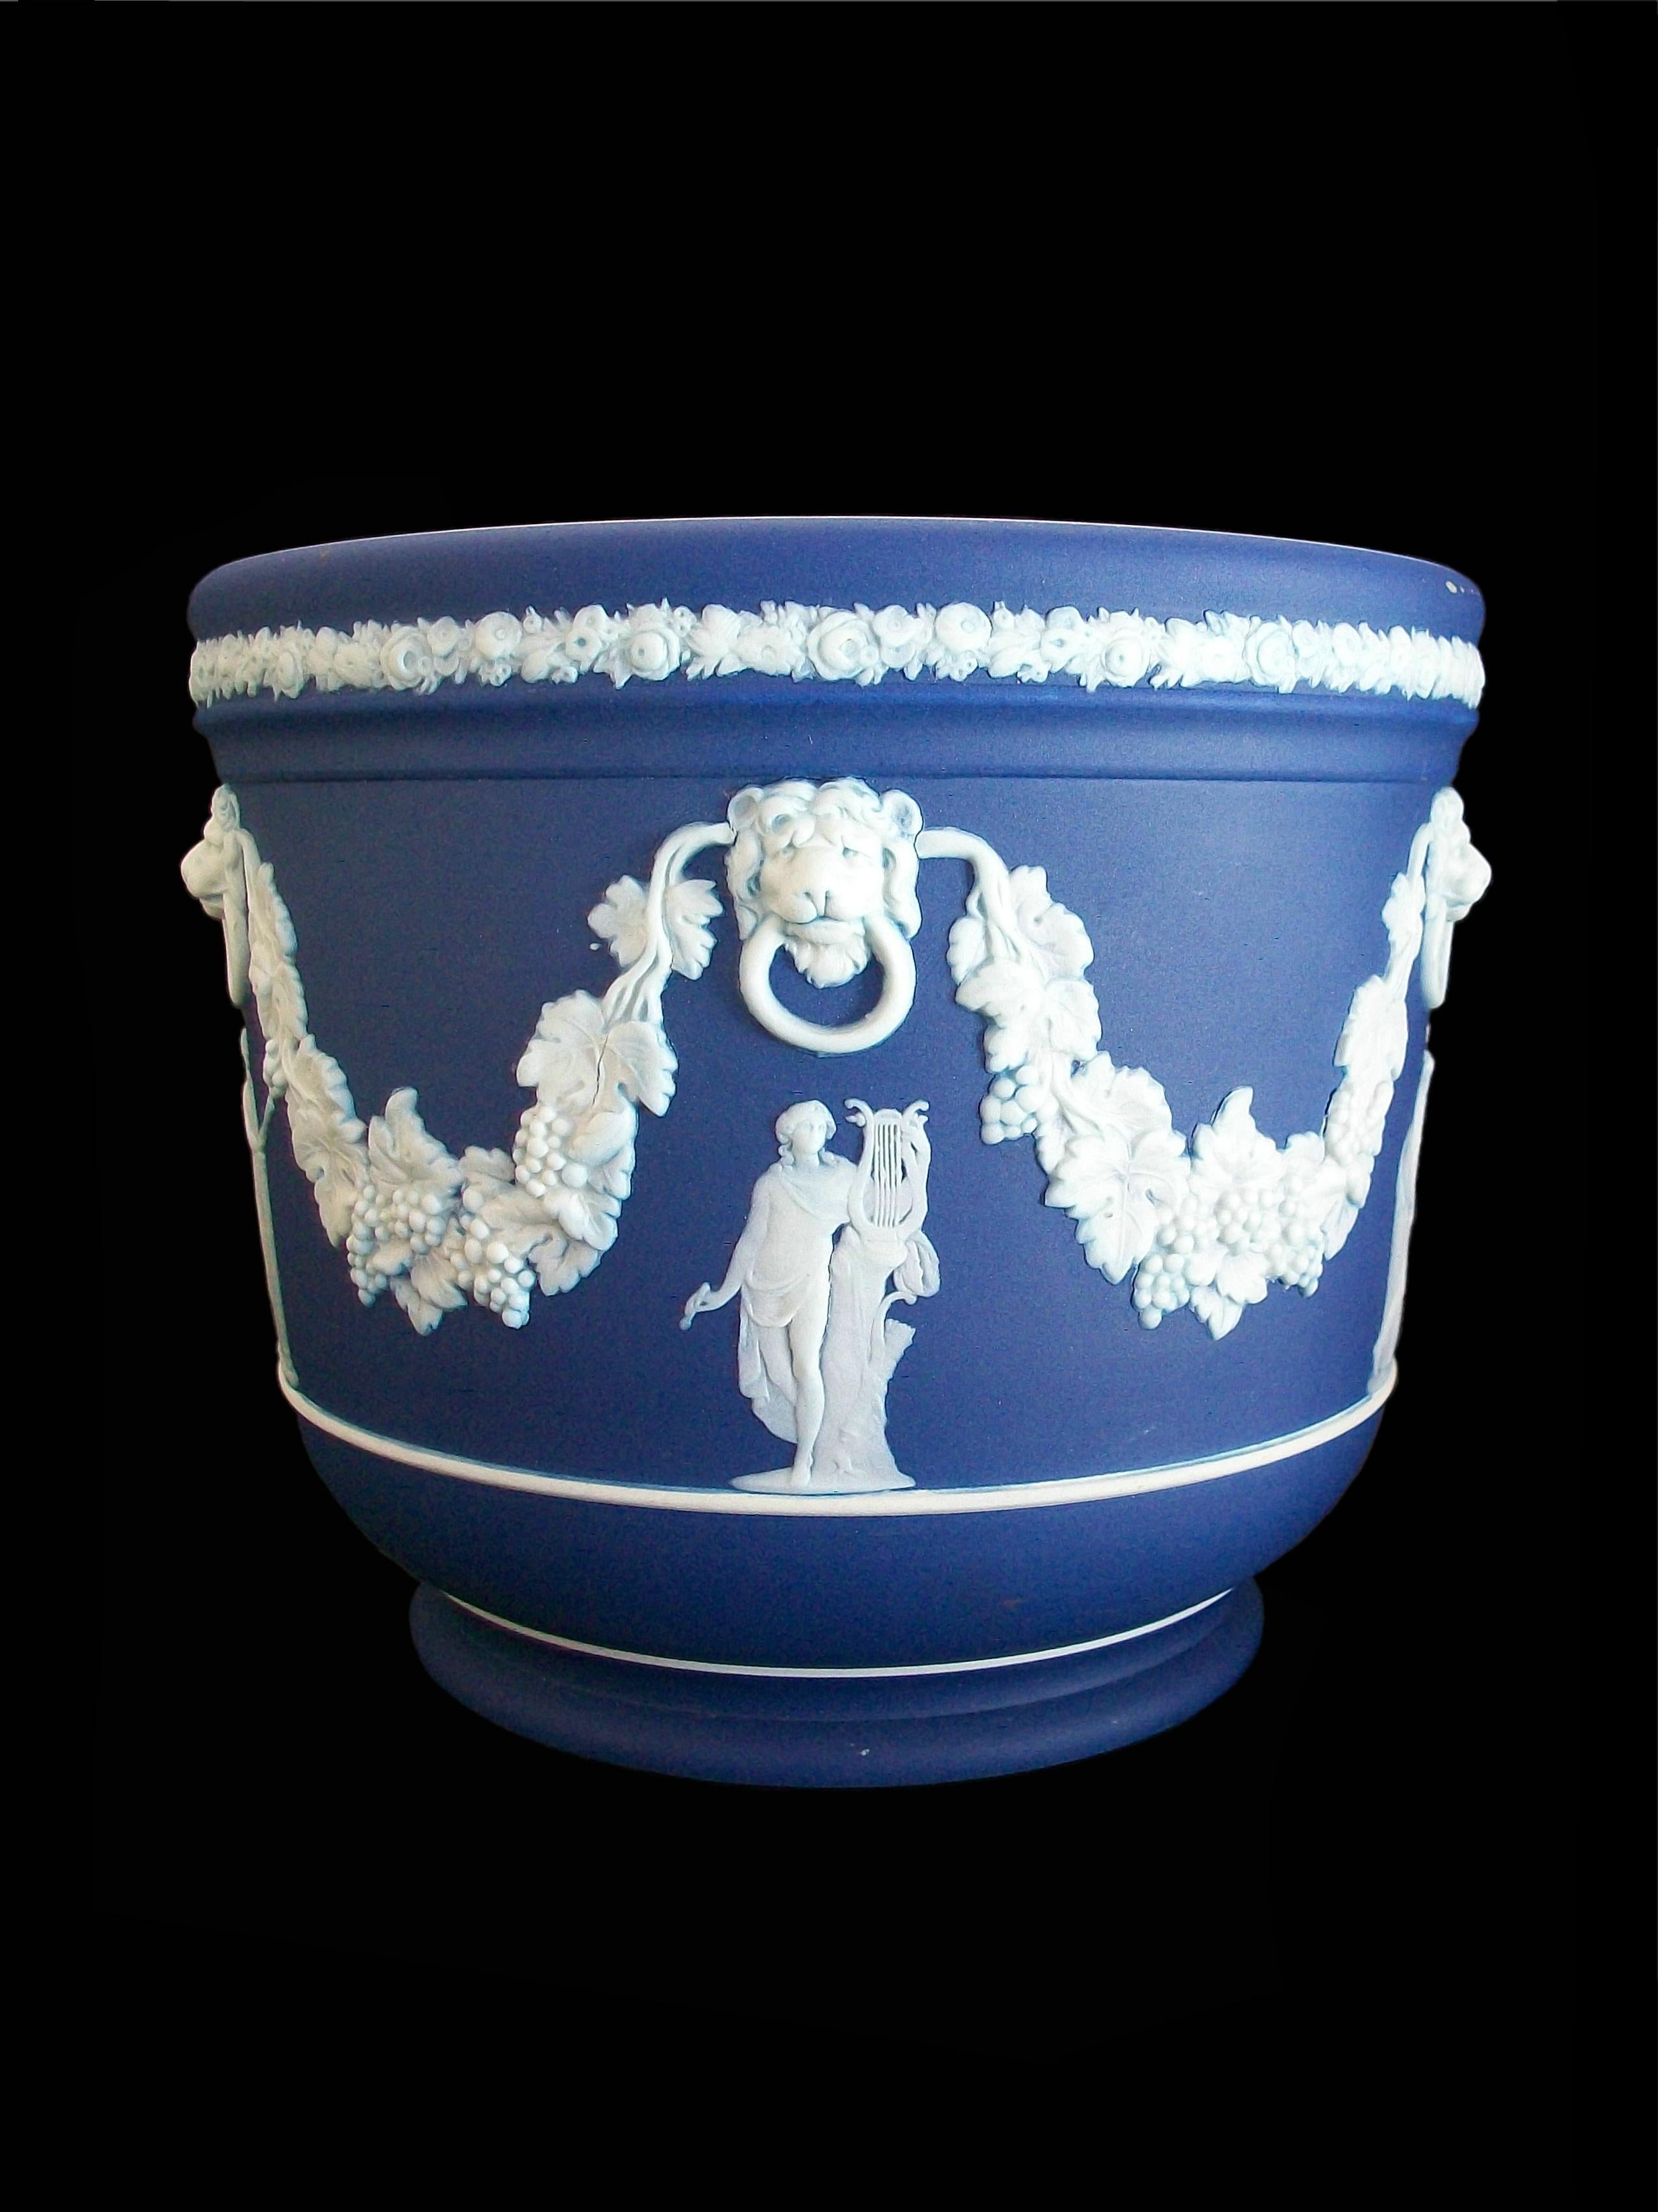 WEDGWOOD - Antique blue Jasperware Neo Classical style planter - featuring five elaborately draped classical figures beneath lions heads and garlands with grapes and leaves - finished with a band of fruits and flowers along the top edge - white